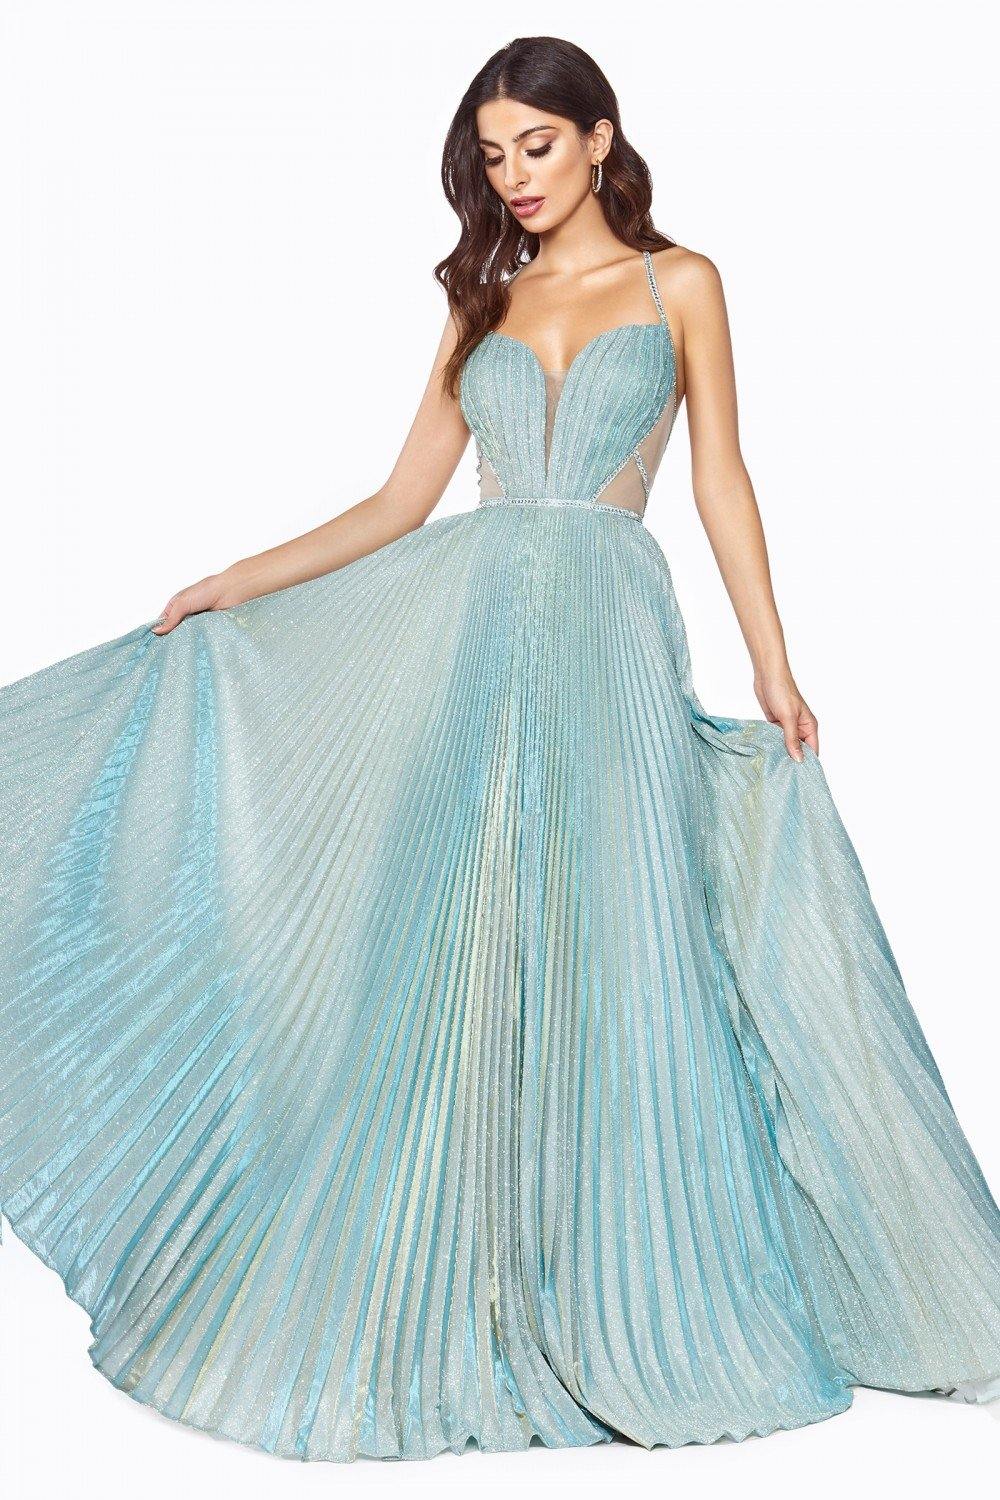 Long Metallic Evening Gown - The Dress Outlet